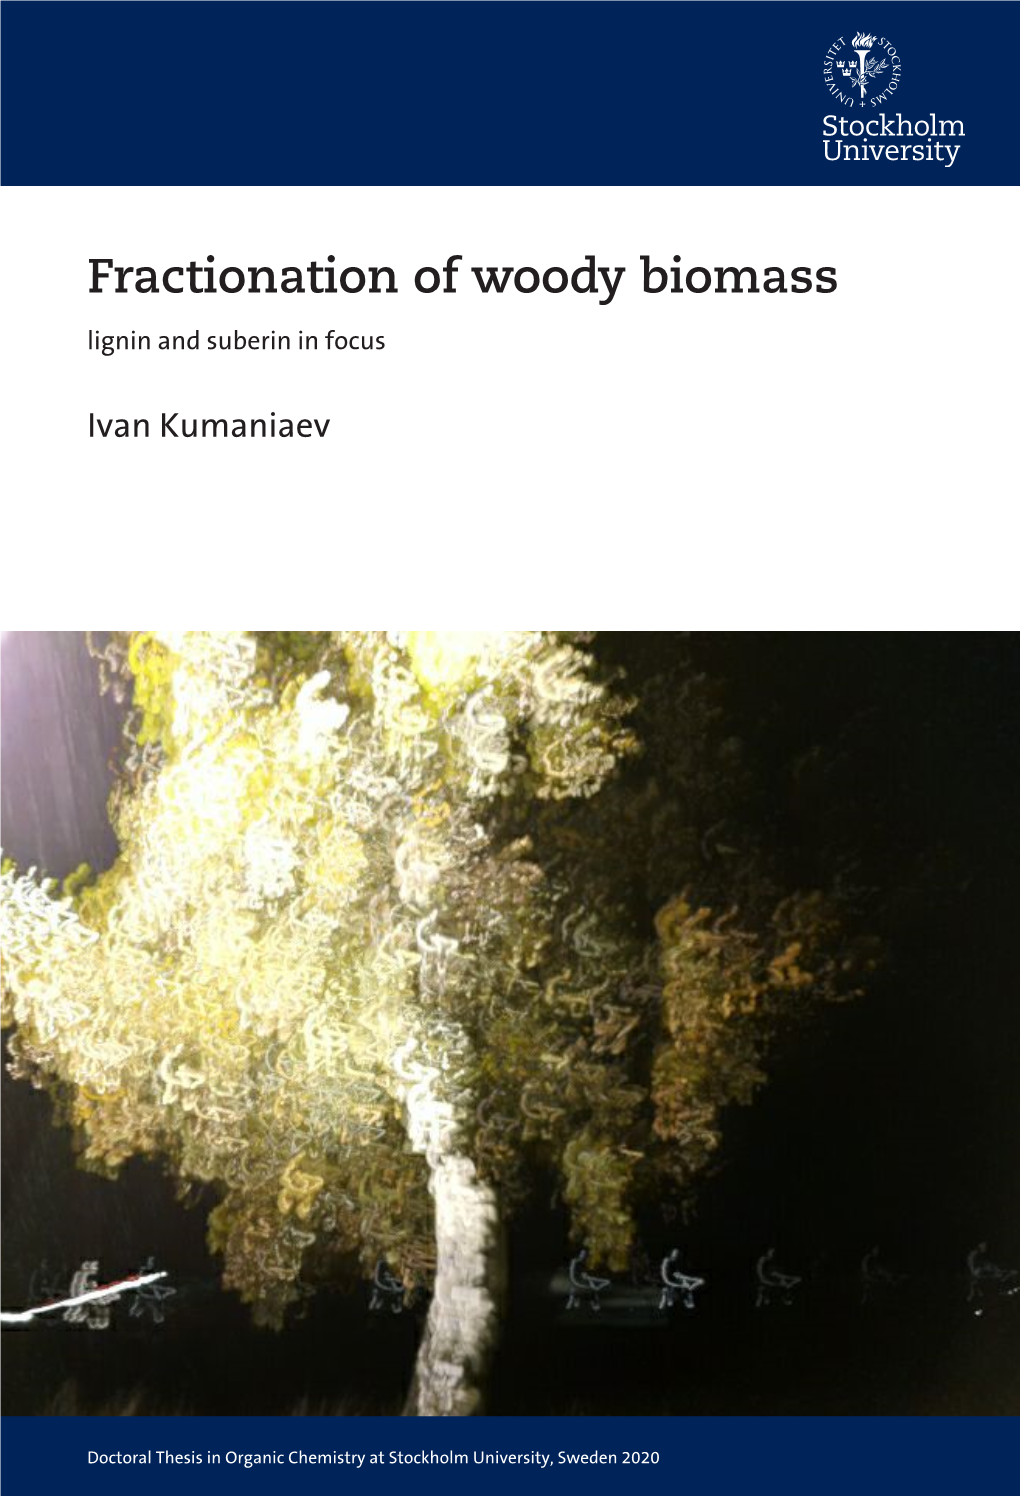 Fractionation of Woody Biomass